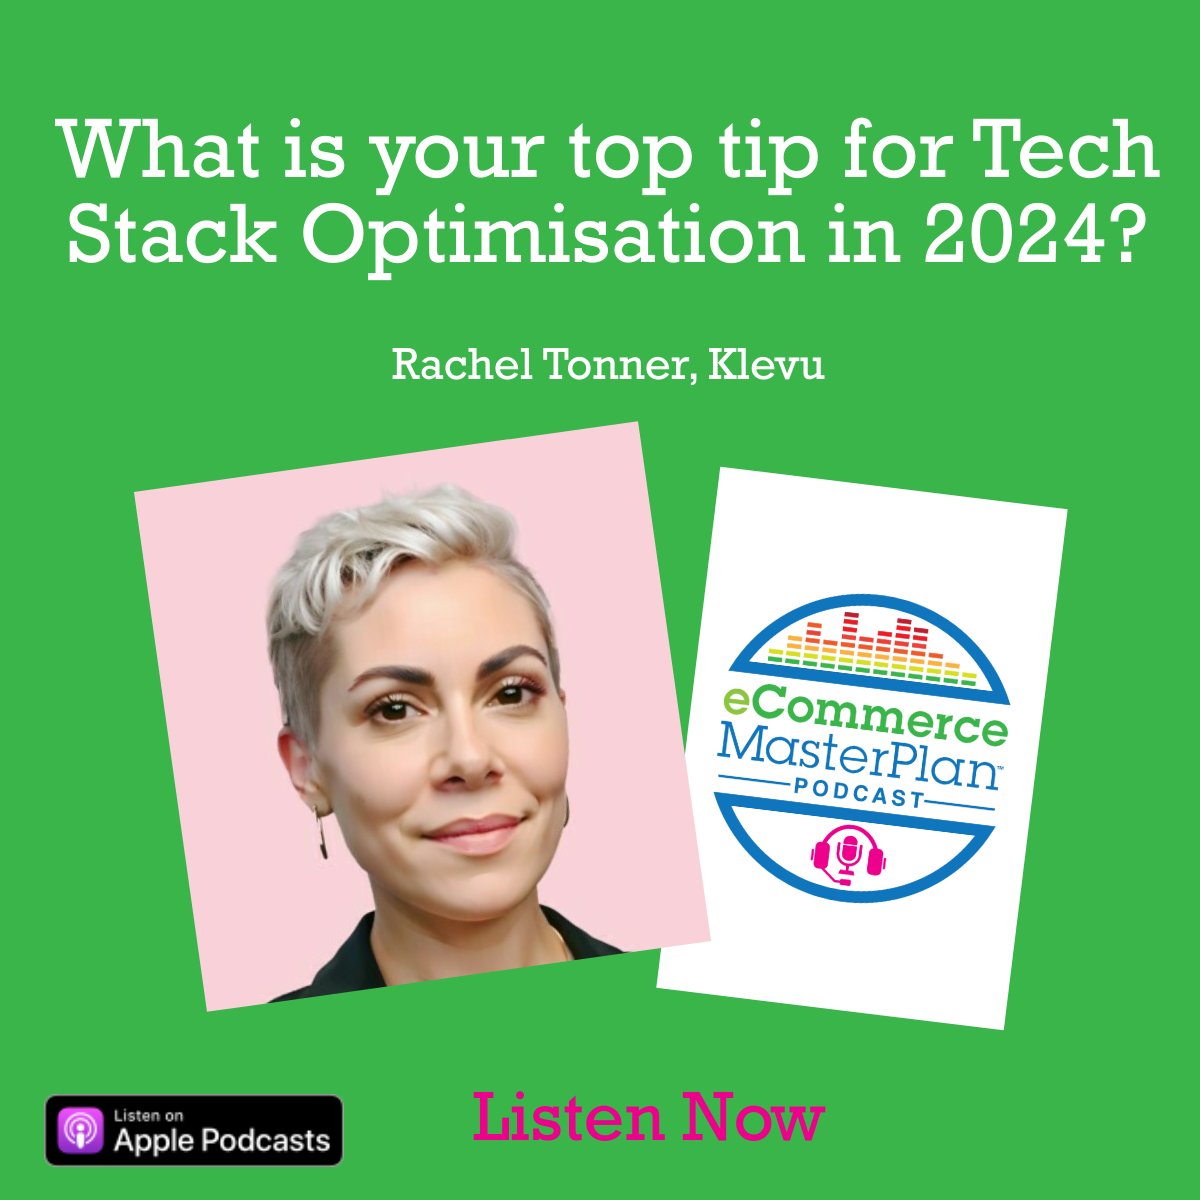 Hear Rachel’s full Top Tip for Tech Stack Optimisation in 2024 now! Listen on Apple Podcasts, Spotify or ecommercemasterplan.com/tech-stack-opt… @KlevuAI @raetonner